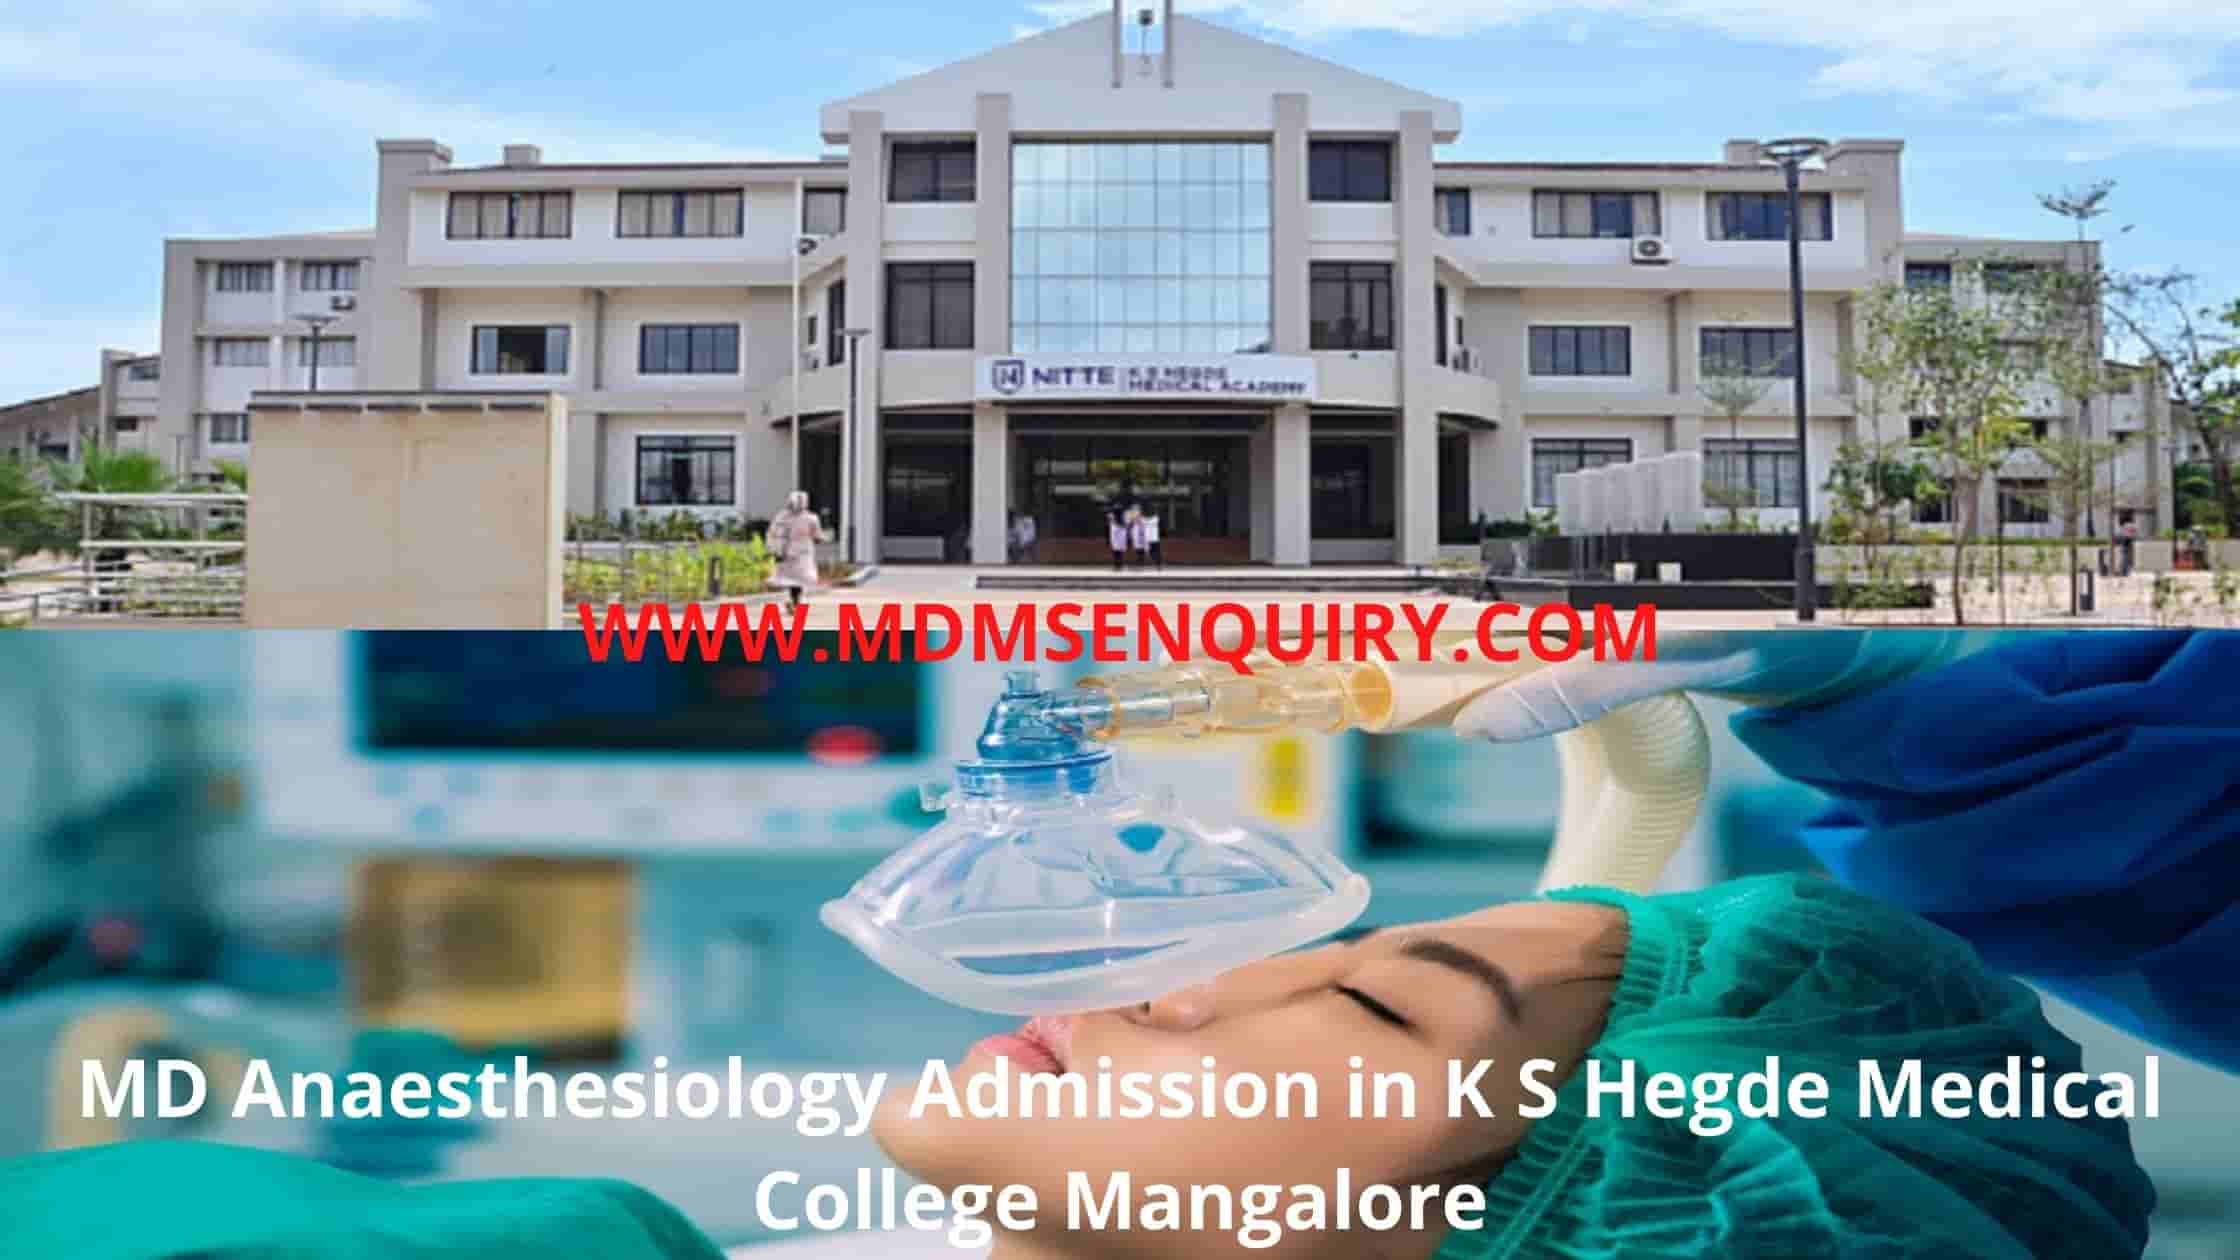 MD Anaesthesiology admission in KS Hegde Medical College Mangalore